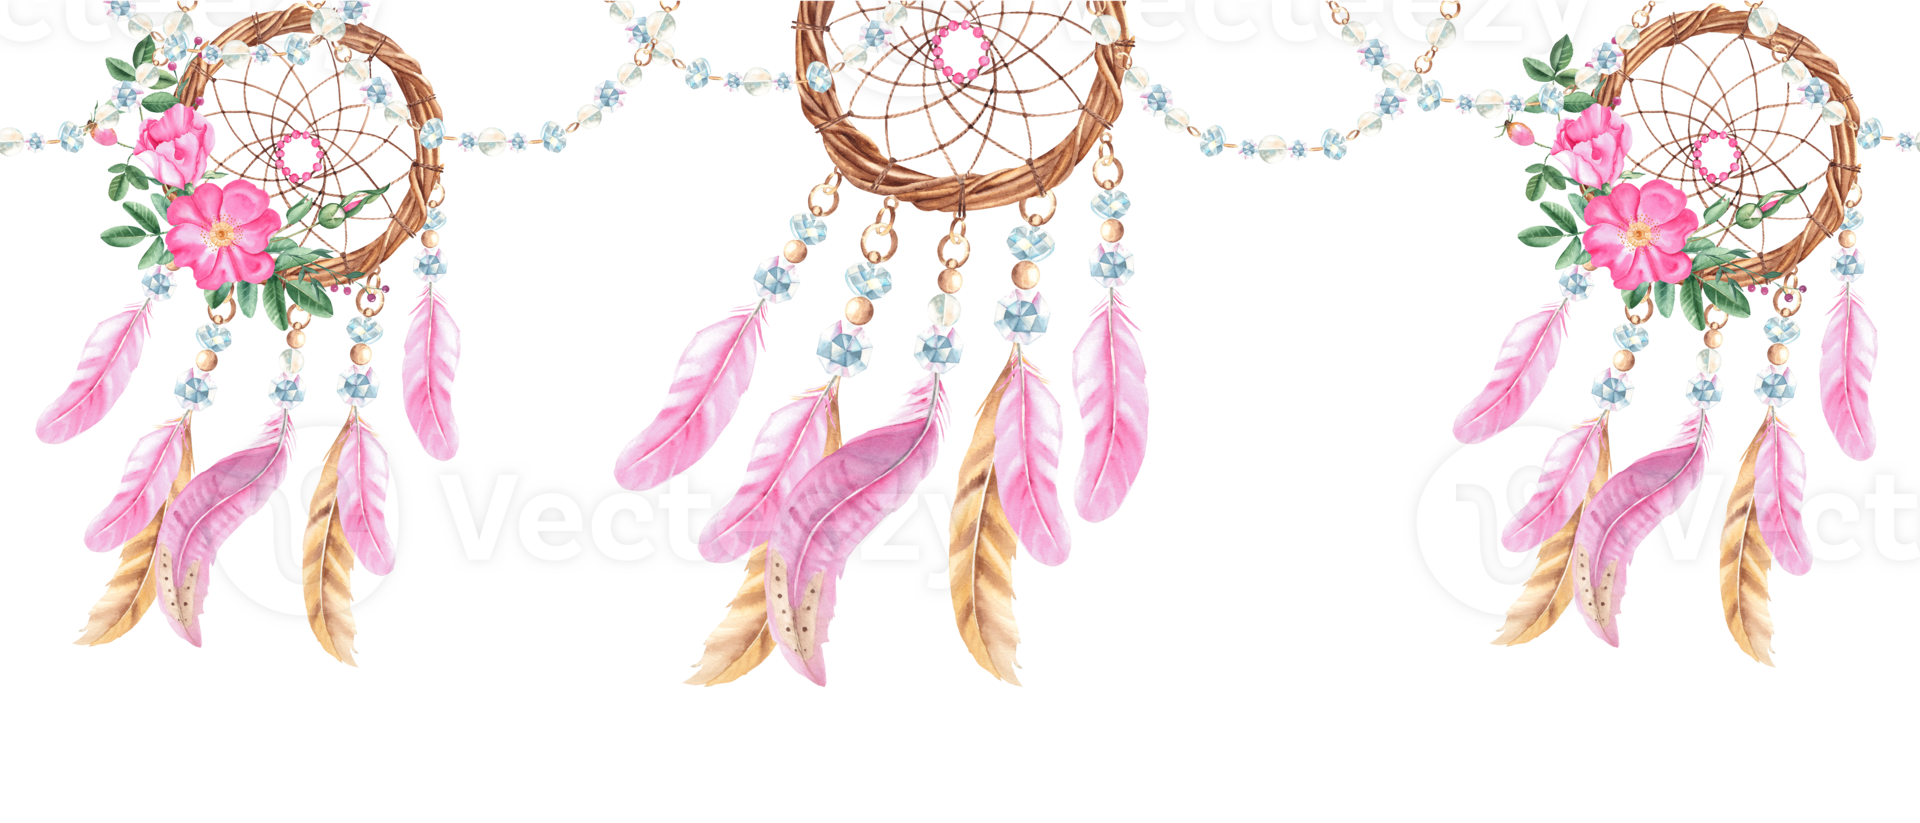 Dream catchers and jewelry threads horizontal watercolor seamless border pattern. Hand drawn realistic illustration. Bohemian decoration with beads, crystals, dog rose flowers and feathers. png